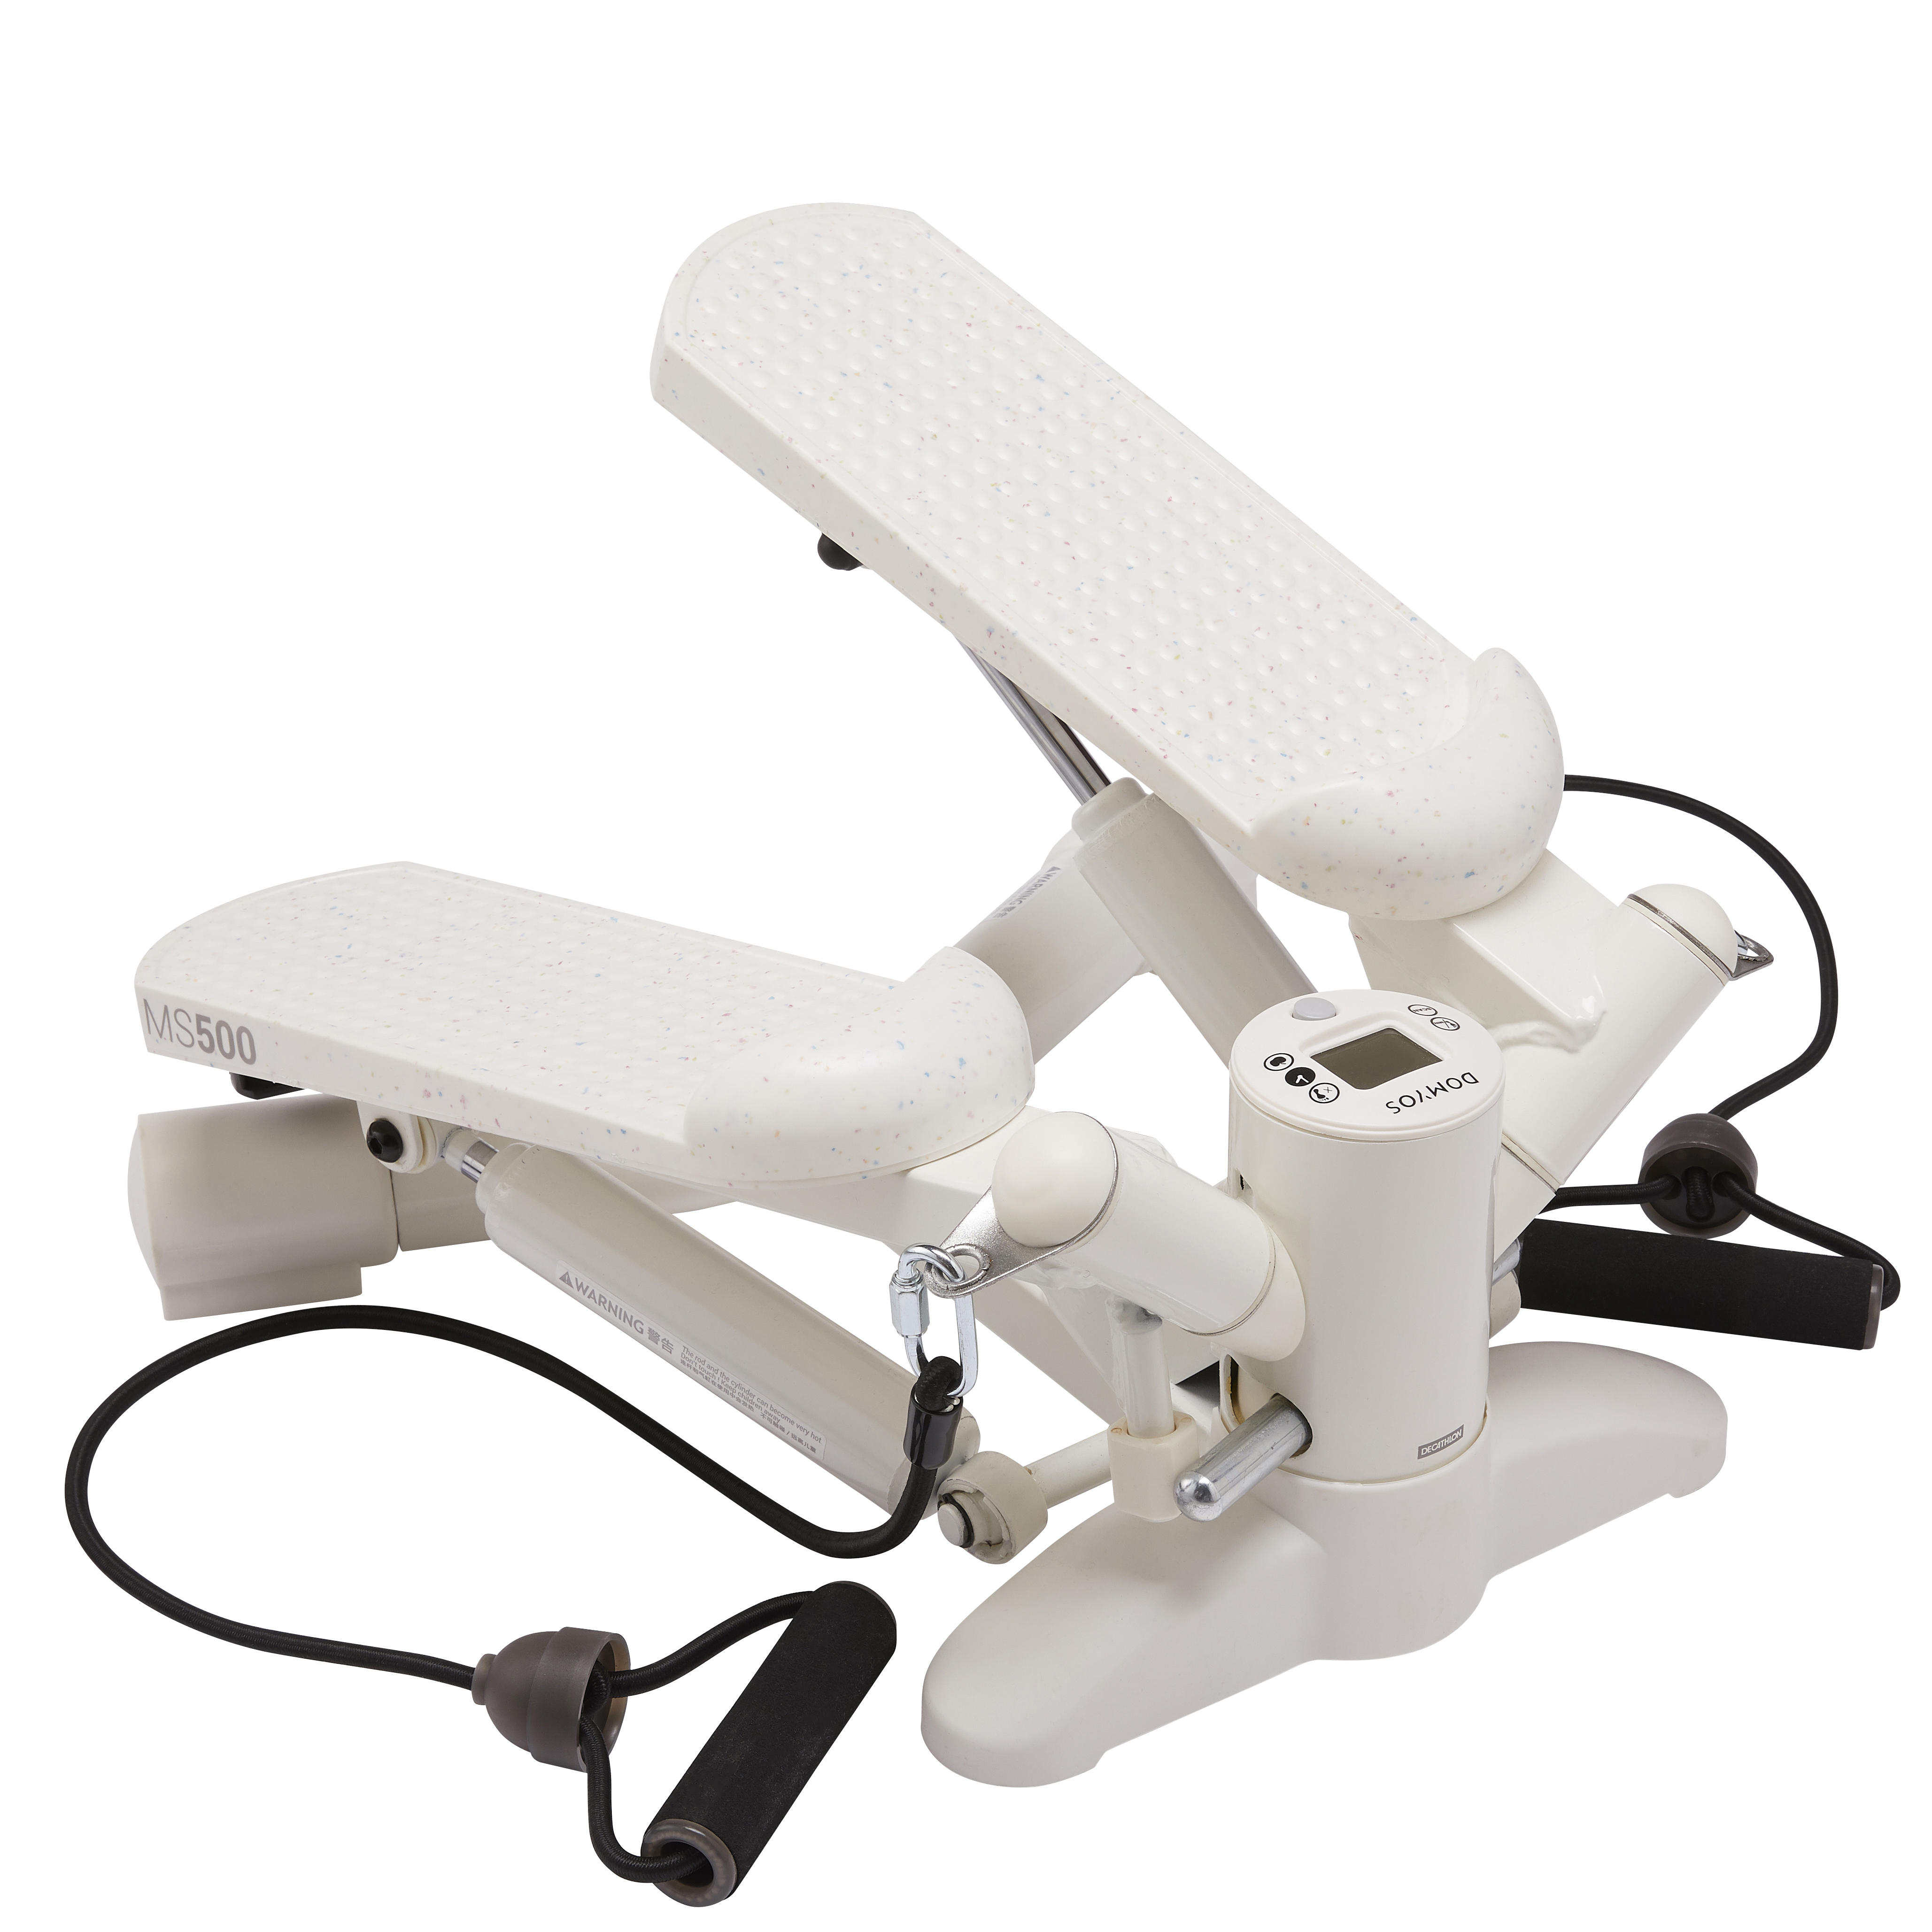 Domyos STEPPER MS120 IVORY/BLUE Exercise Stair Climber Swing Workout